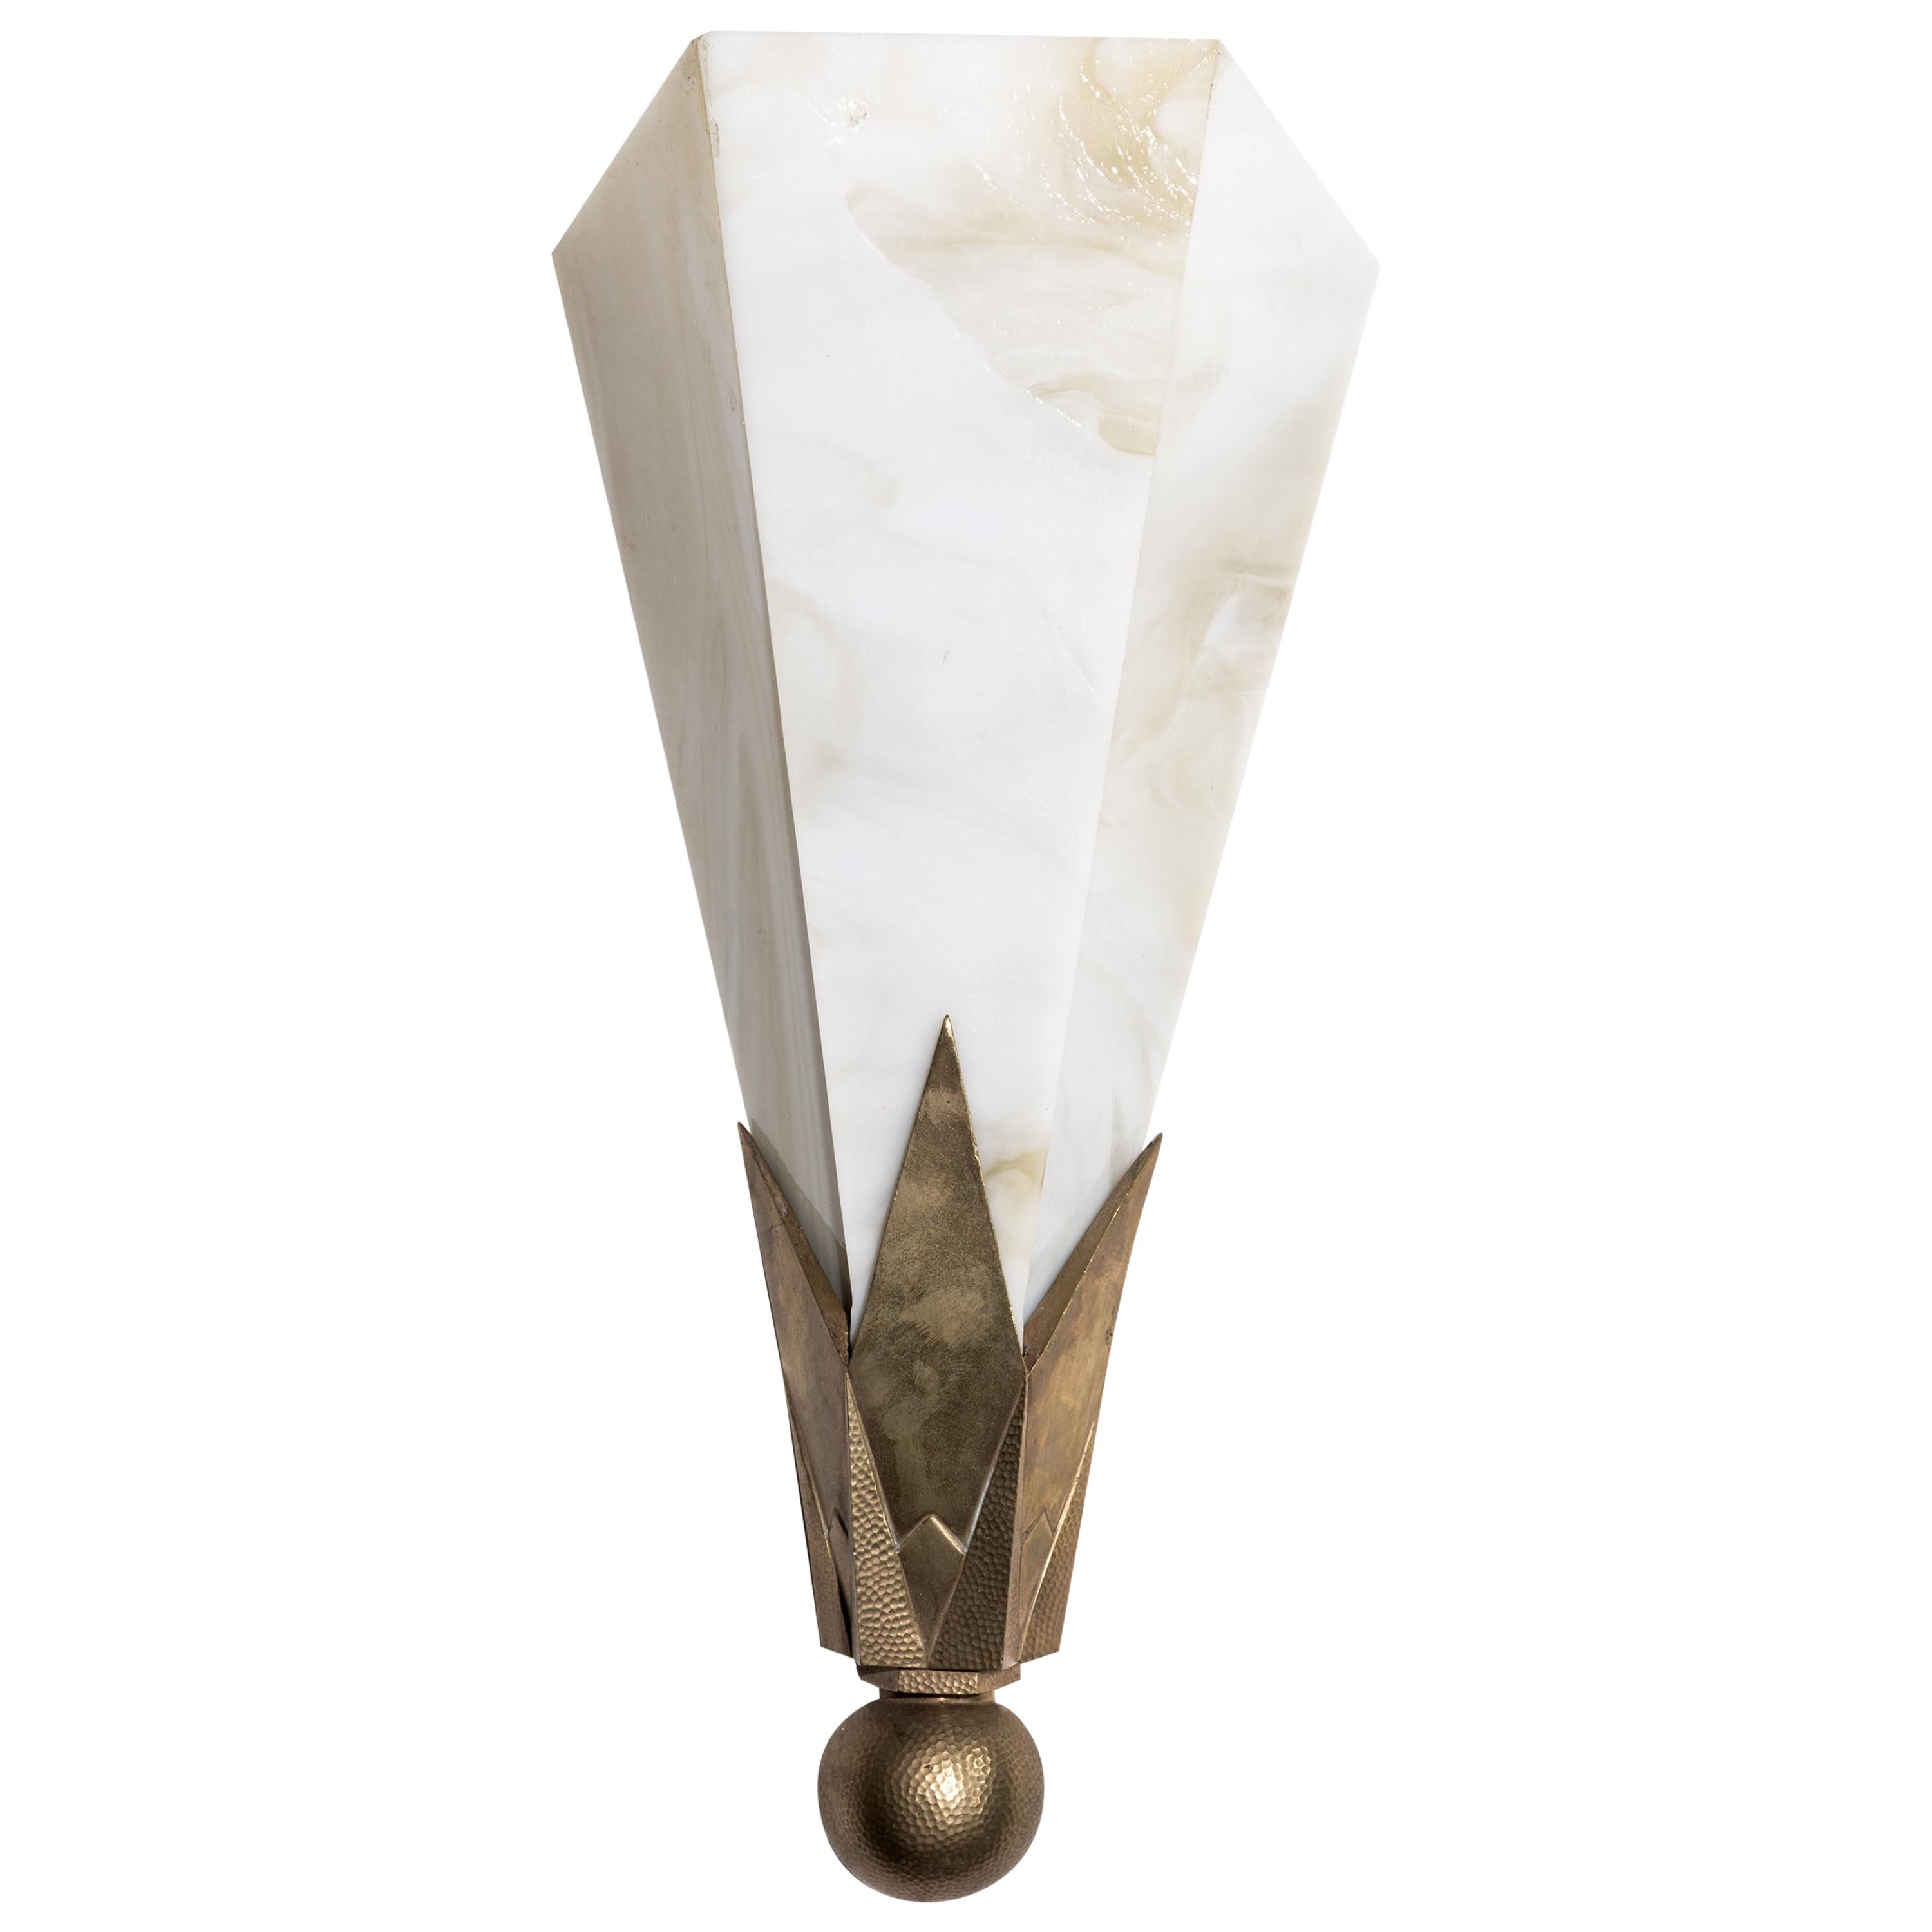 Pair of French Art Deco Wall Lights with Brass and Alabaster Glass, 1925